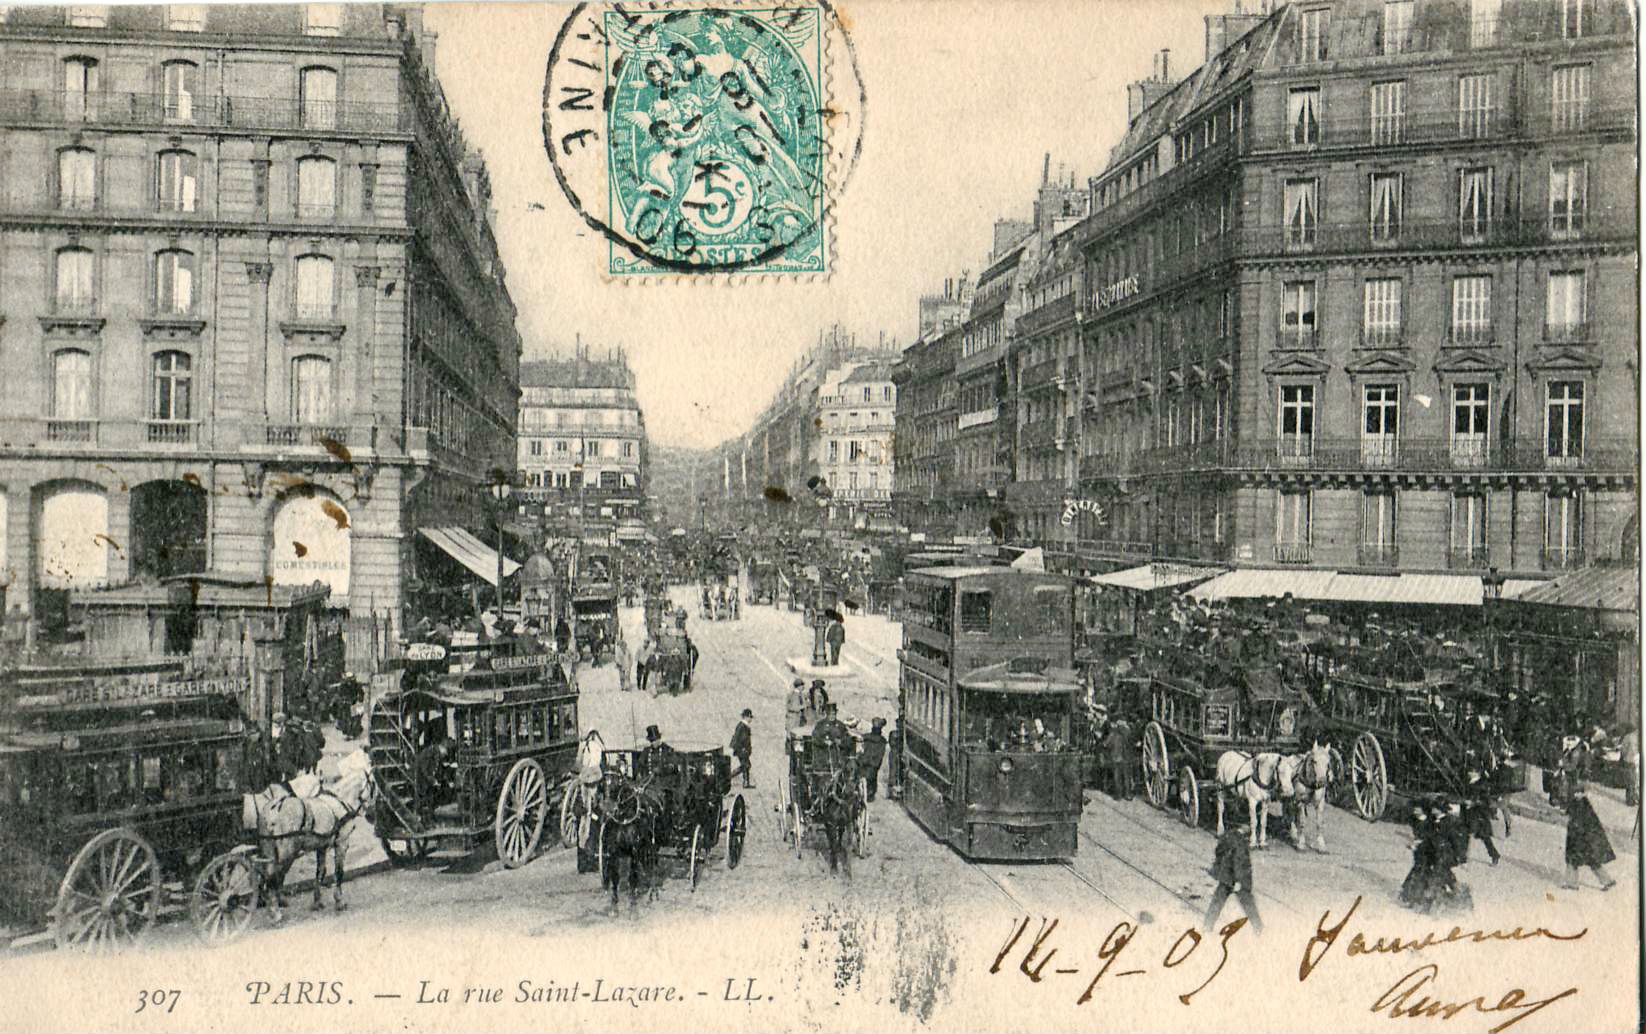 Paris in the early 20th C